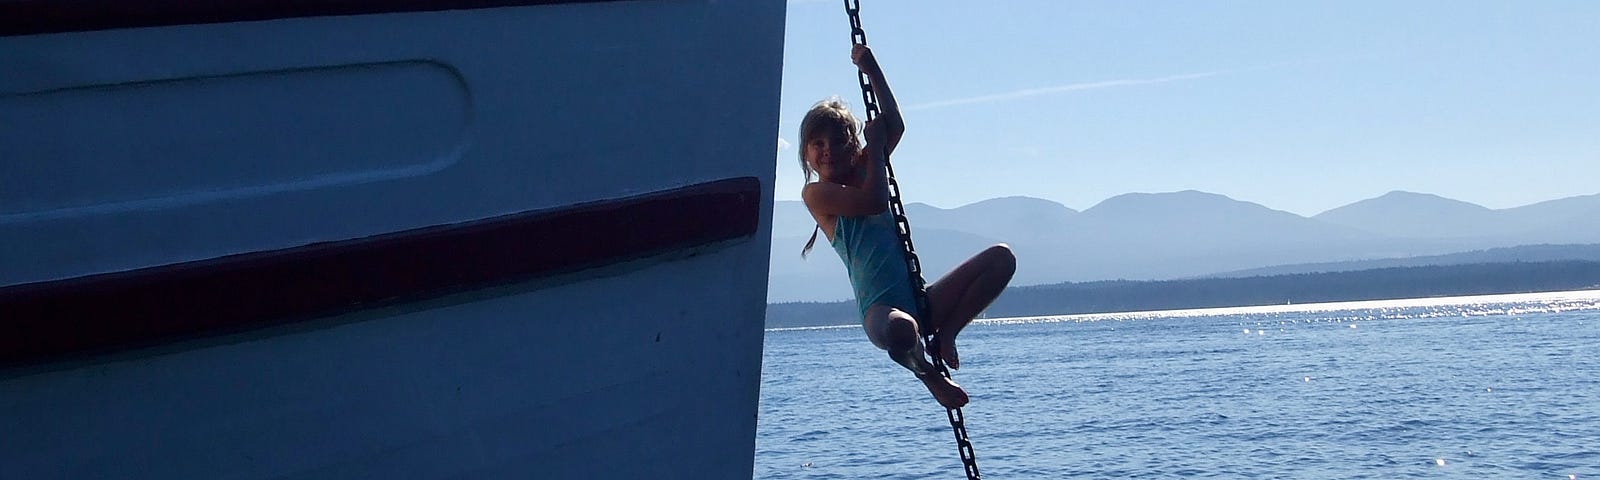 A girl climbs an anchor chain attached to a boat. A blue sky and an ocean are behind her image.